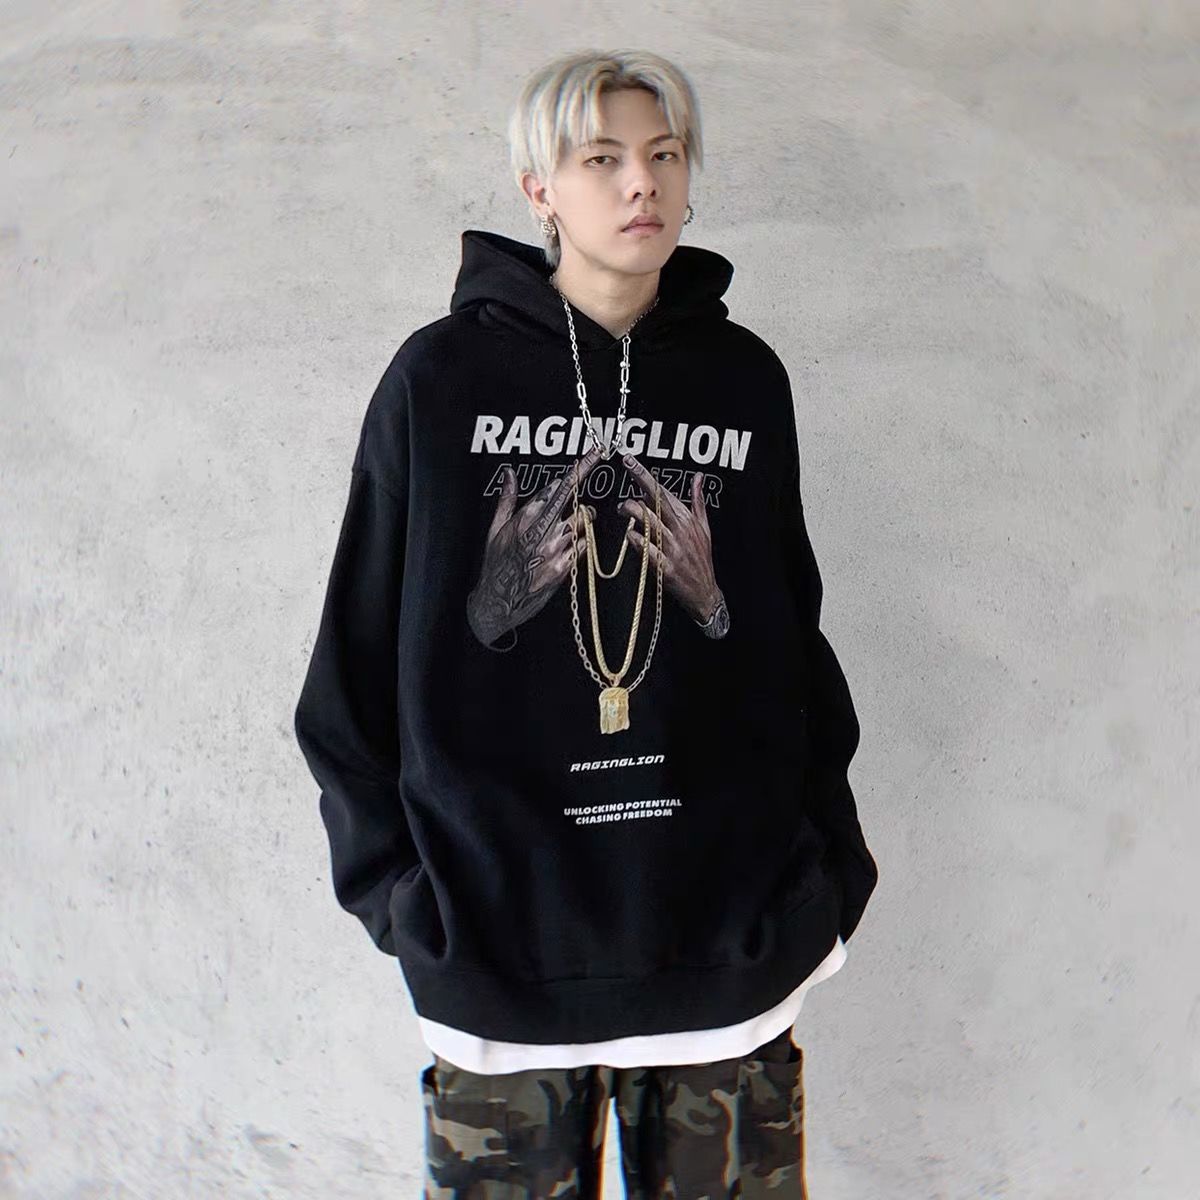 Guochao original European and American high street American hip-hop plus velvet hooded sweater men and women ins trend couple hoodie tide clothing